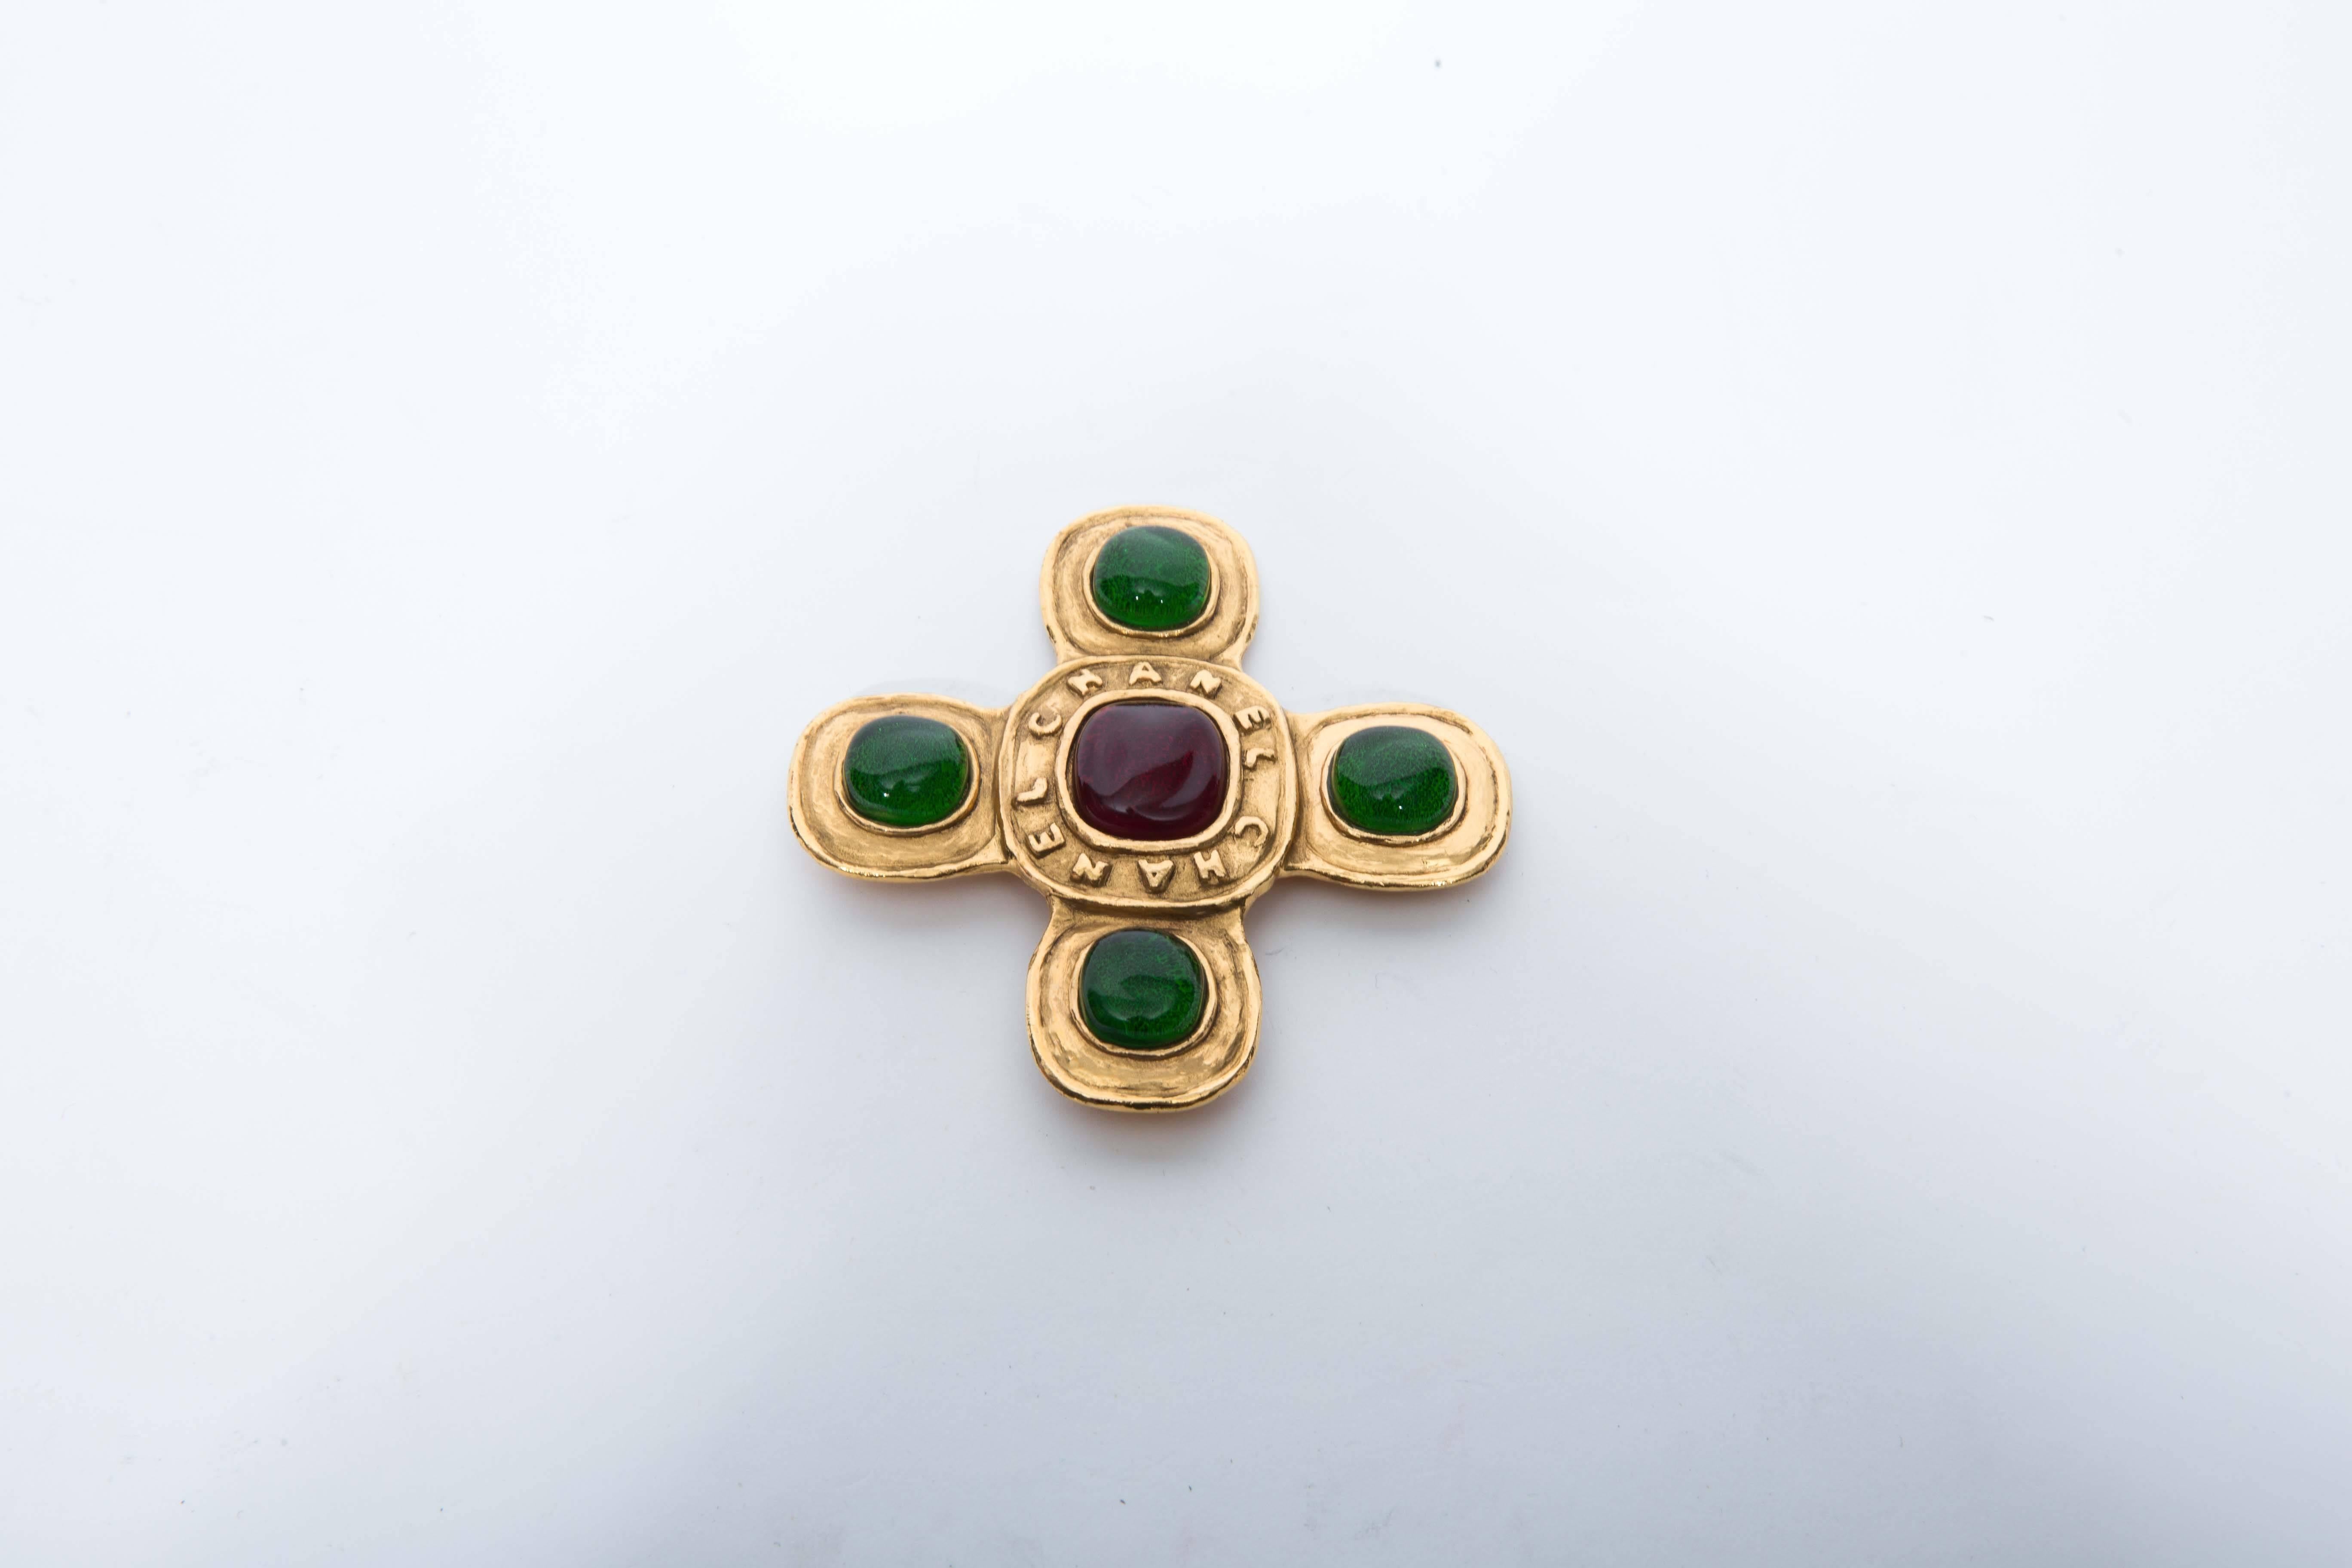 Stunning Chanel Brooch with Five Large Gripoix Stones in Emerald Green and Claret. Embossed CHANEL surrounds the Center Glass Stone. This Piece is in Perfect Condition.